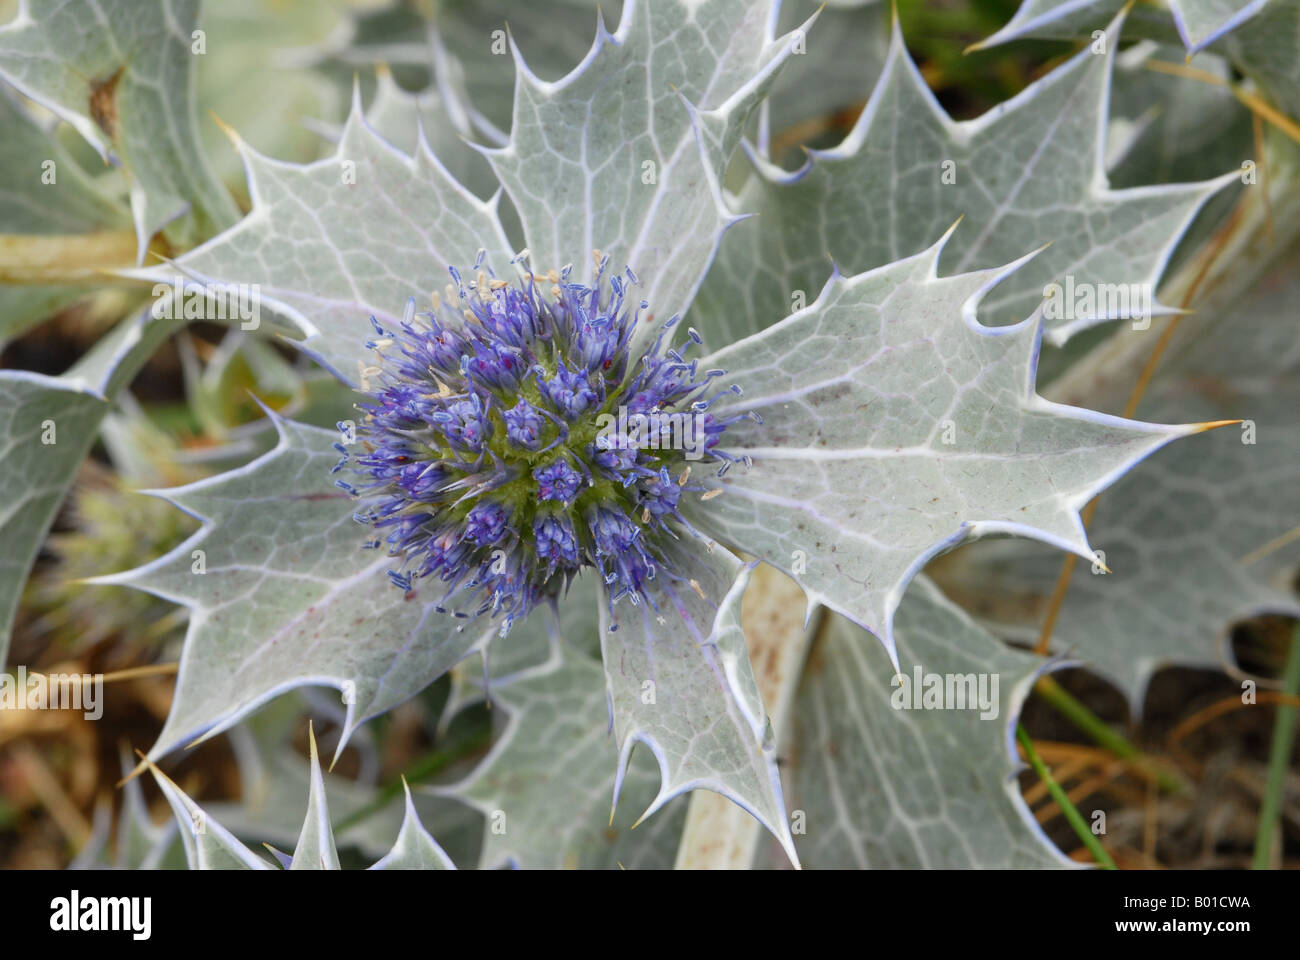 Sea Holly flower in close up Stock Photo